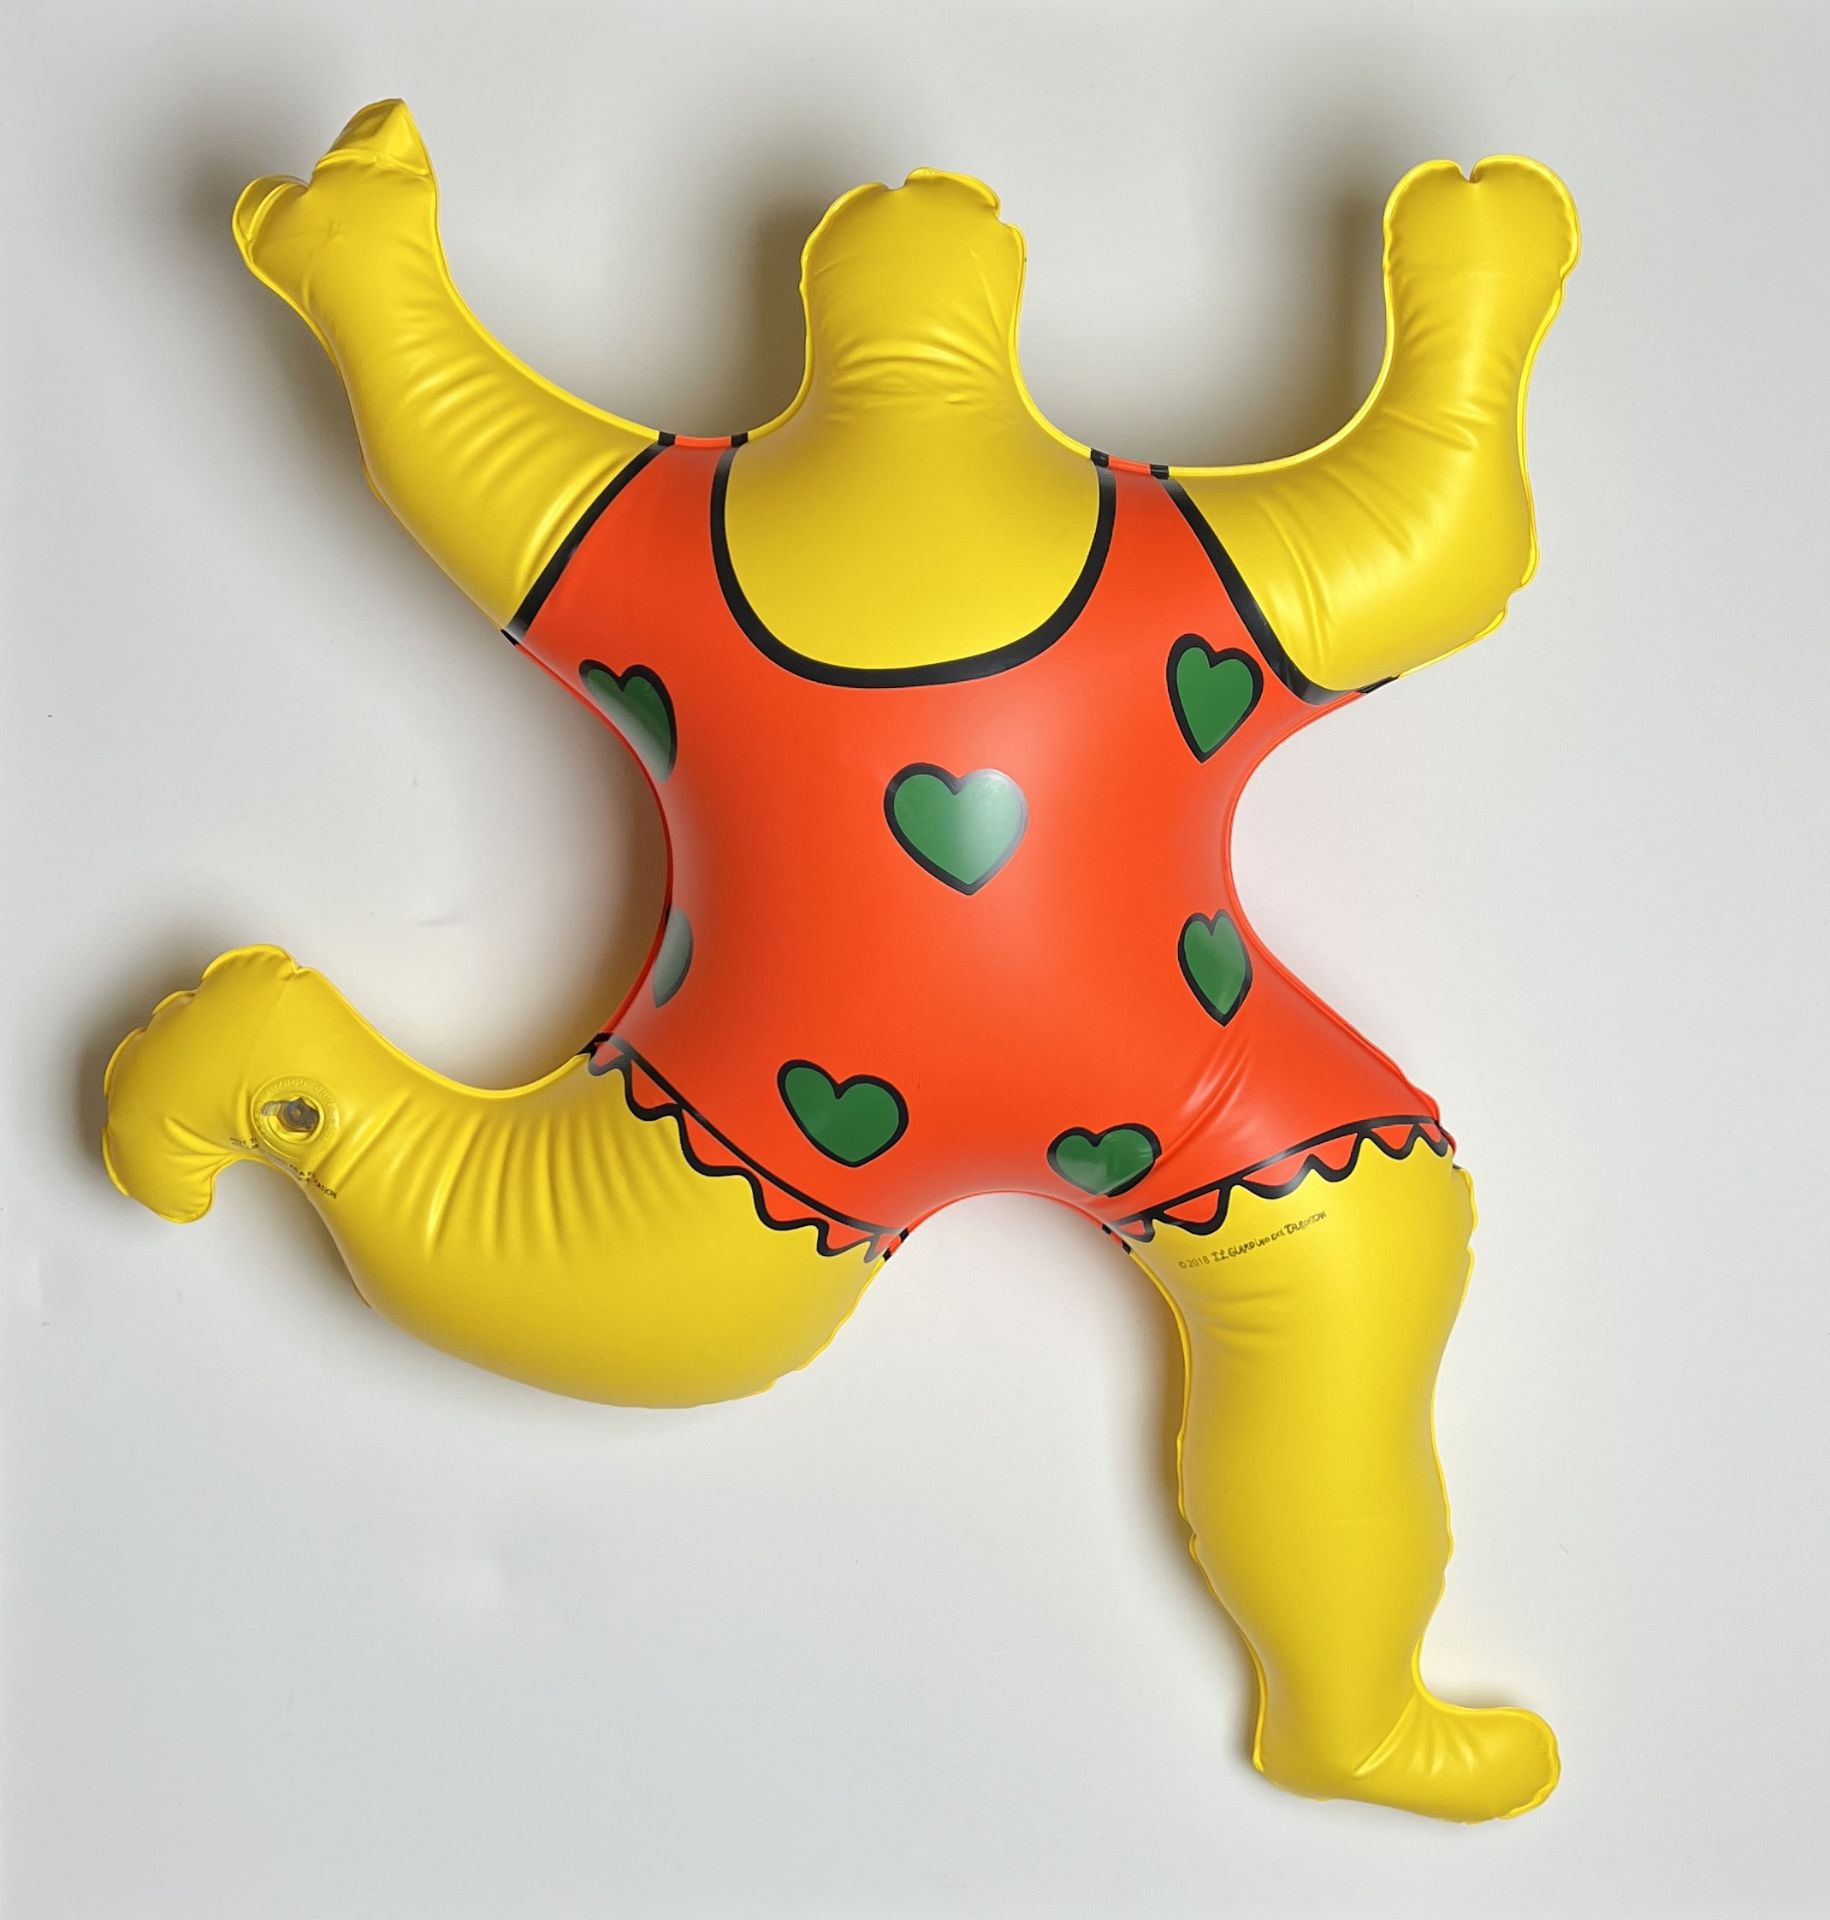 Niki De Saint Phalle. Yellow chick. Inflatable plastic sculpture. Signed "Nana by Niki" in the plate - Image 2 of 5